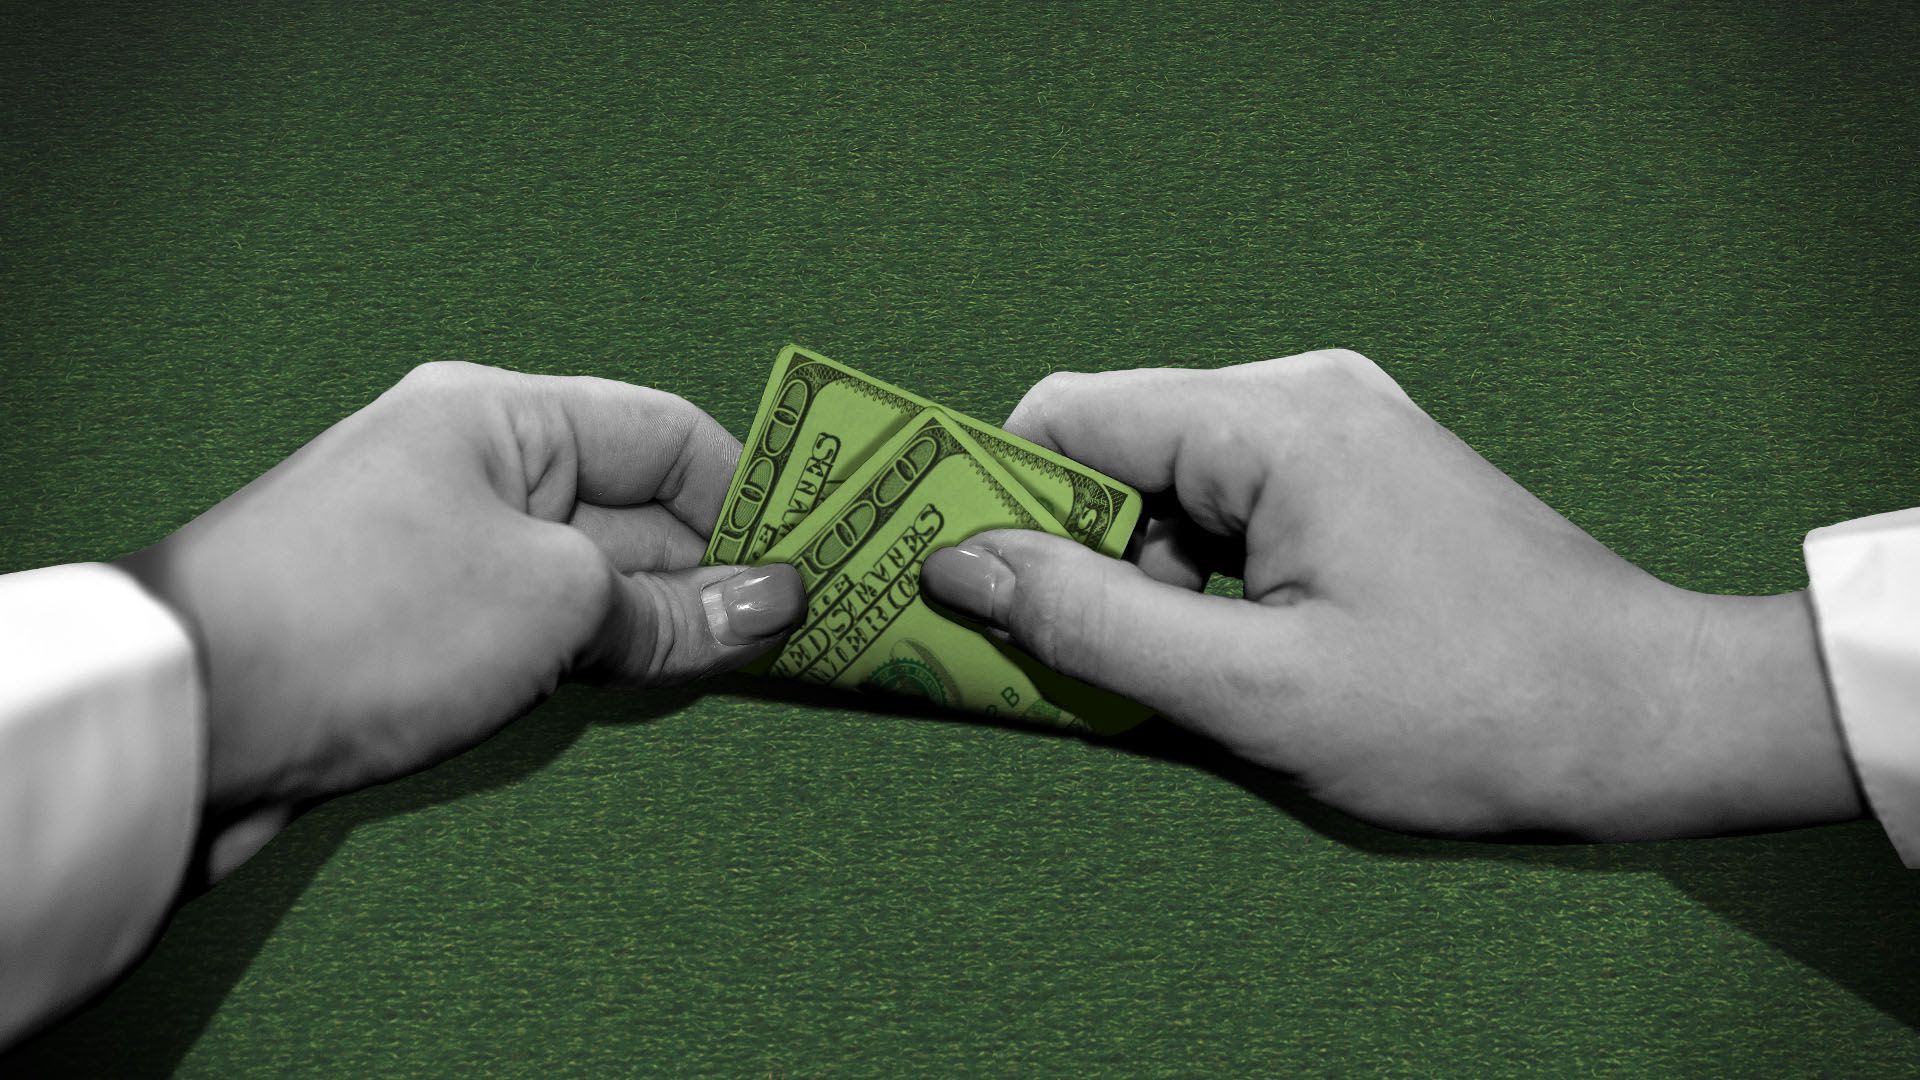 Illustration of a pair of hands holding money like a deck of cards